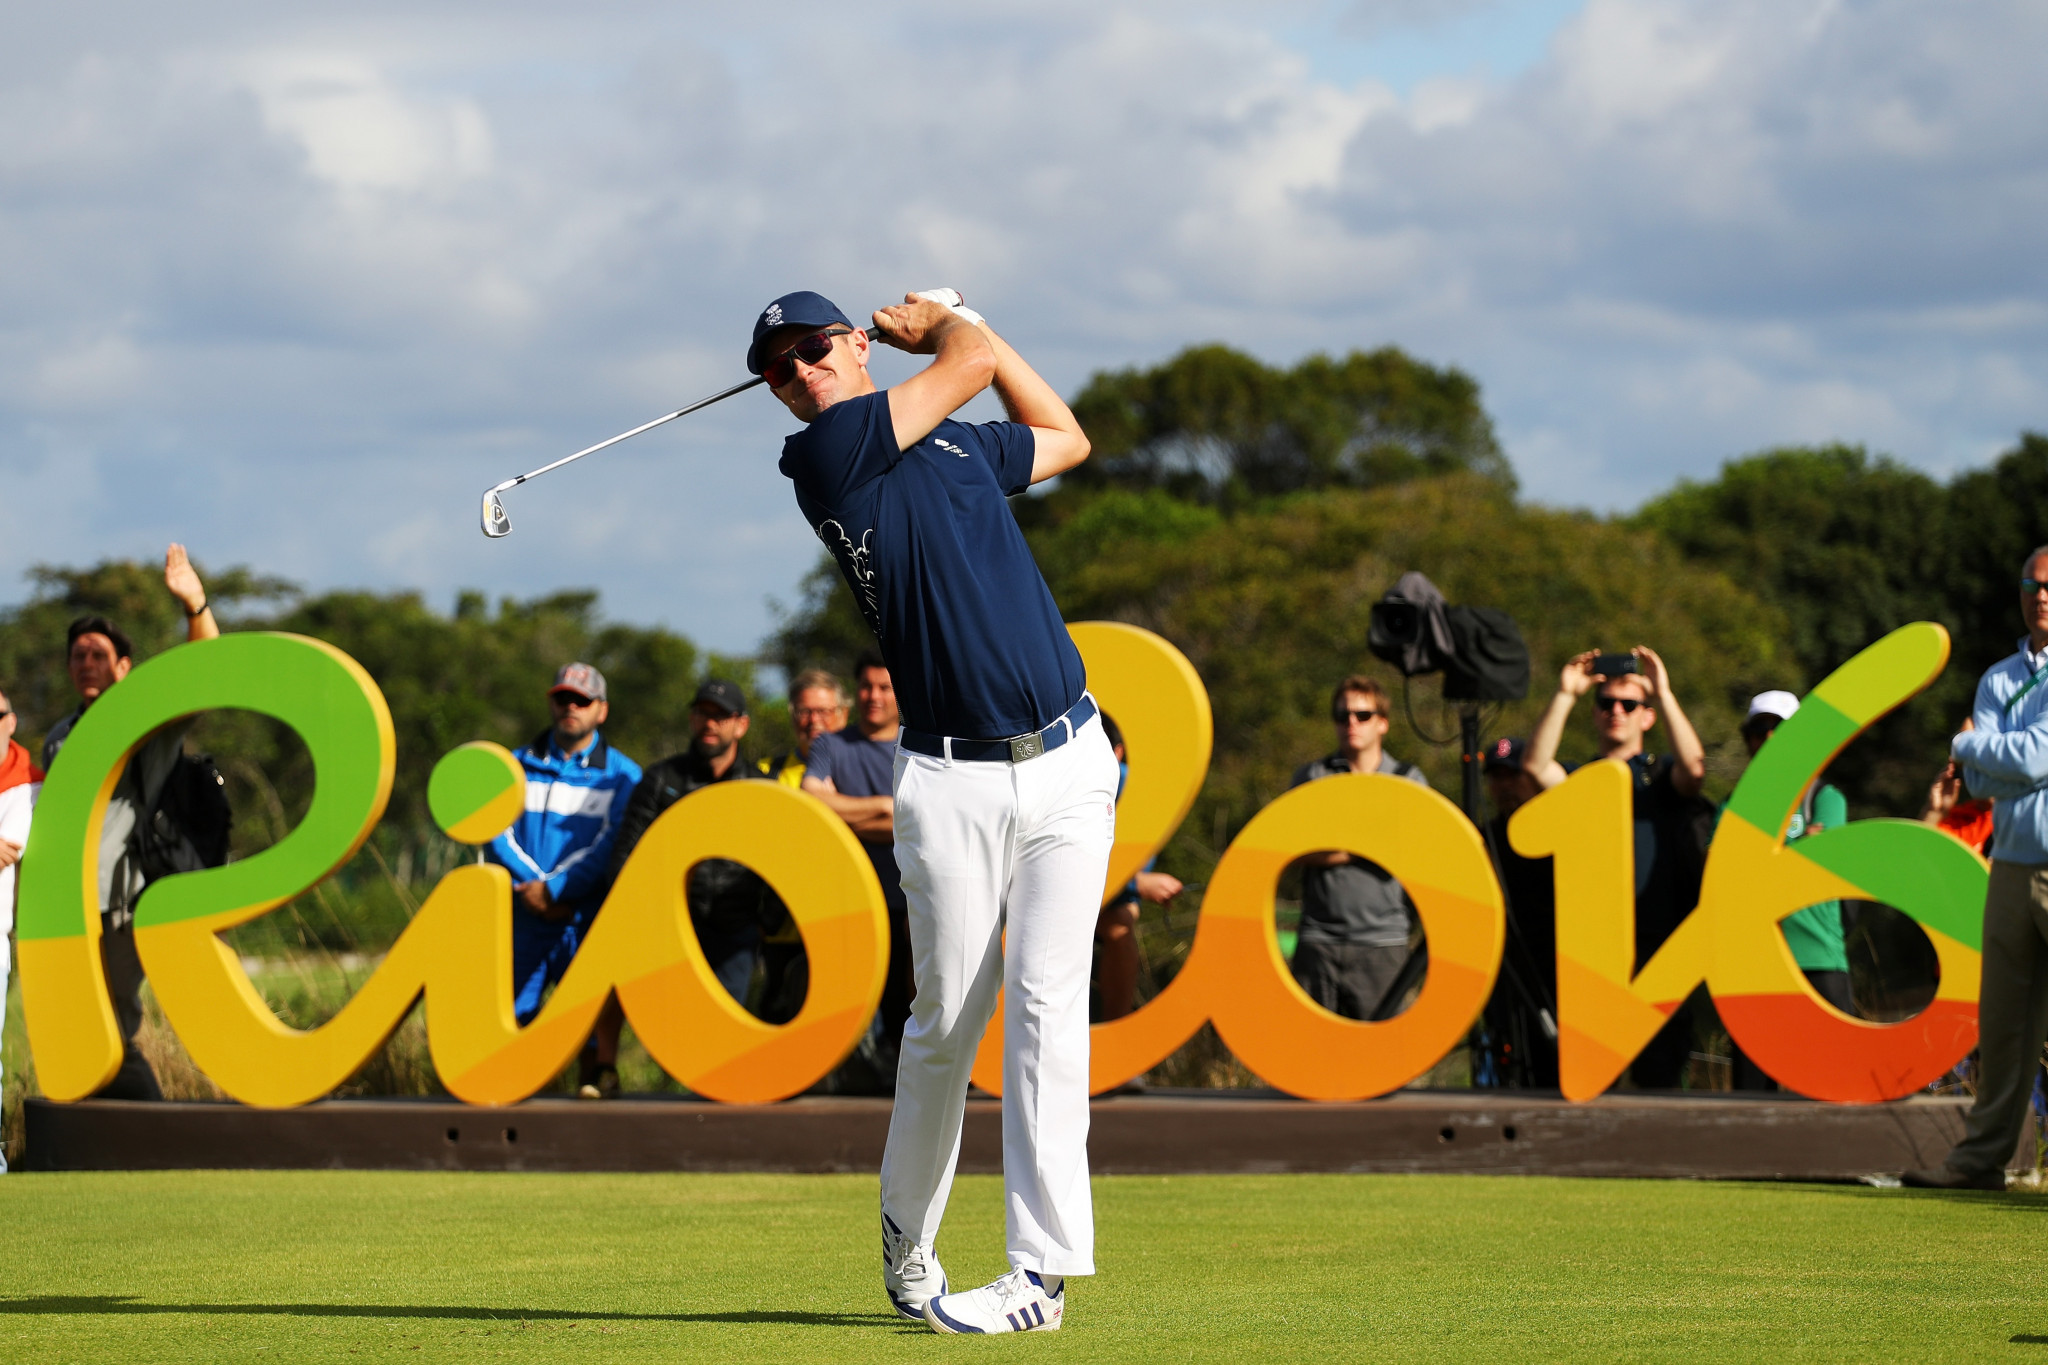 The commitment shown by Justin Rose in winning men's gold at Rio 2016 was hugely influential in maintaining the sport's presence in the Olympics ©Getty Images